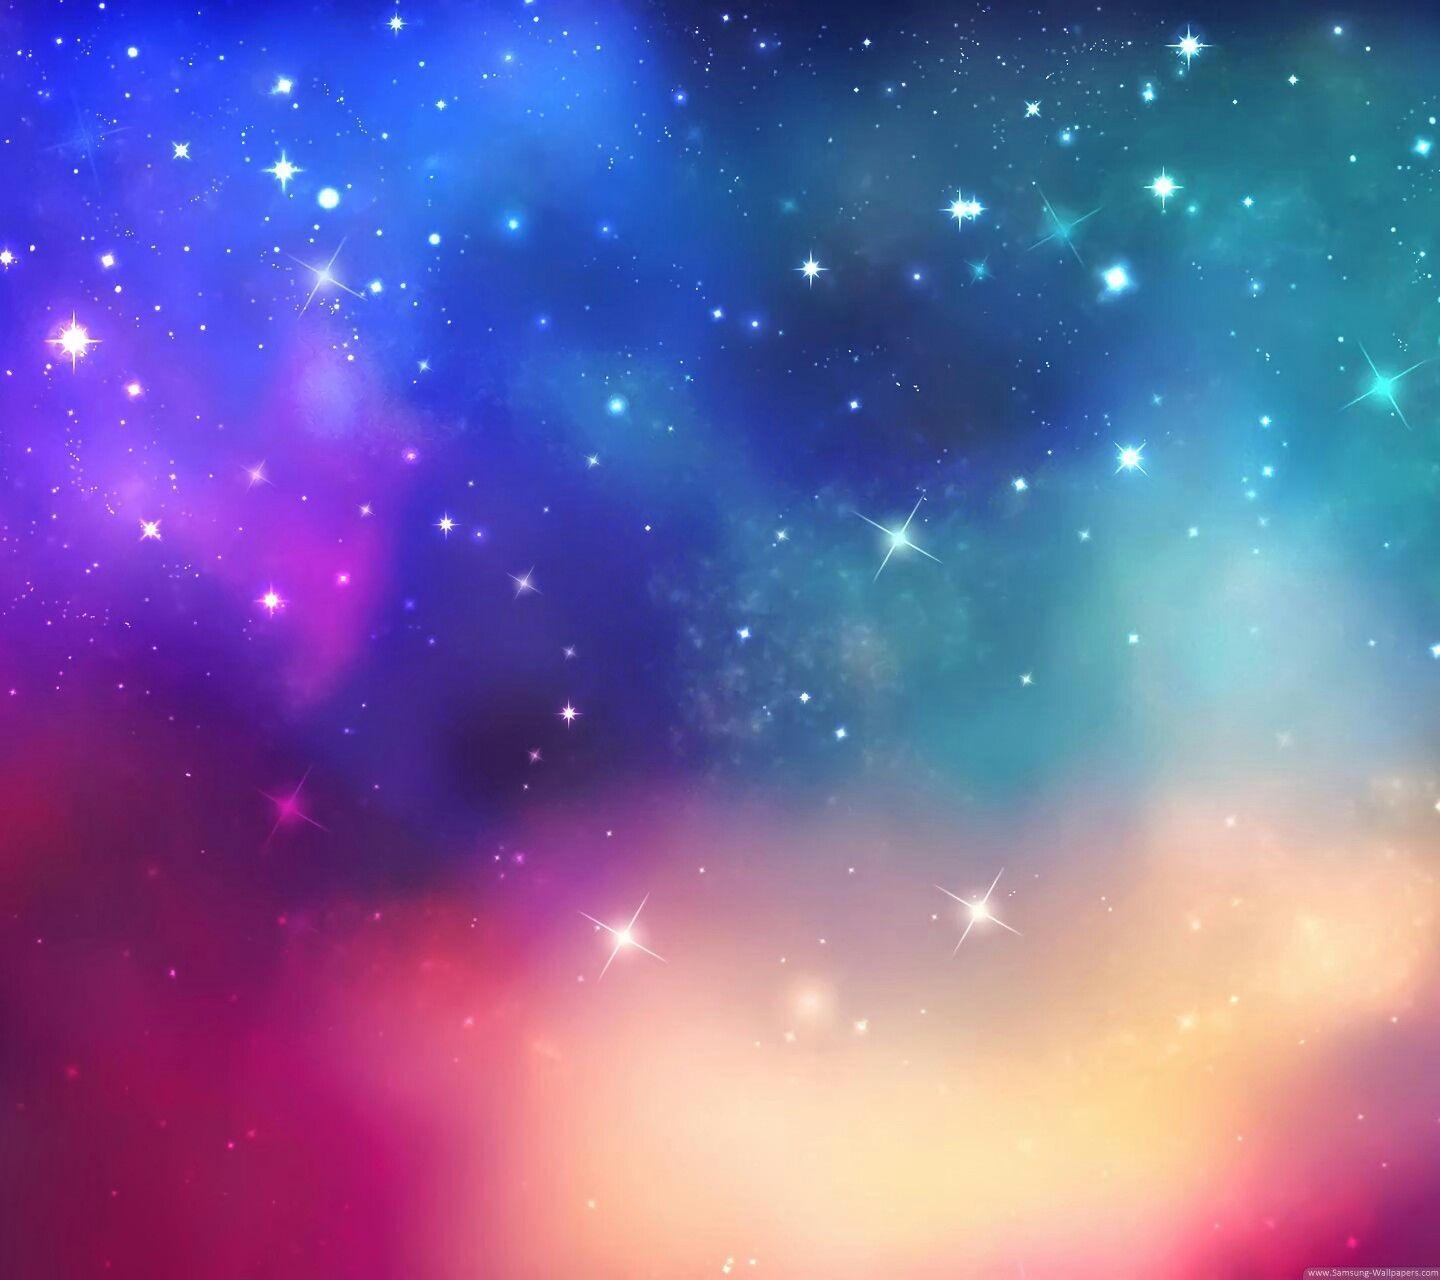 34,446 Rainbow Galaxy Background Images, Stock Photos & Vectors |  Shutterstock